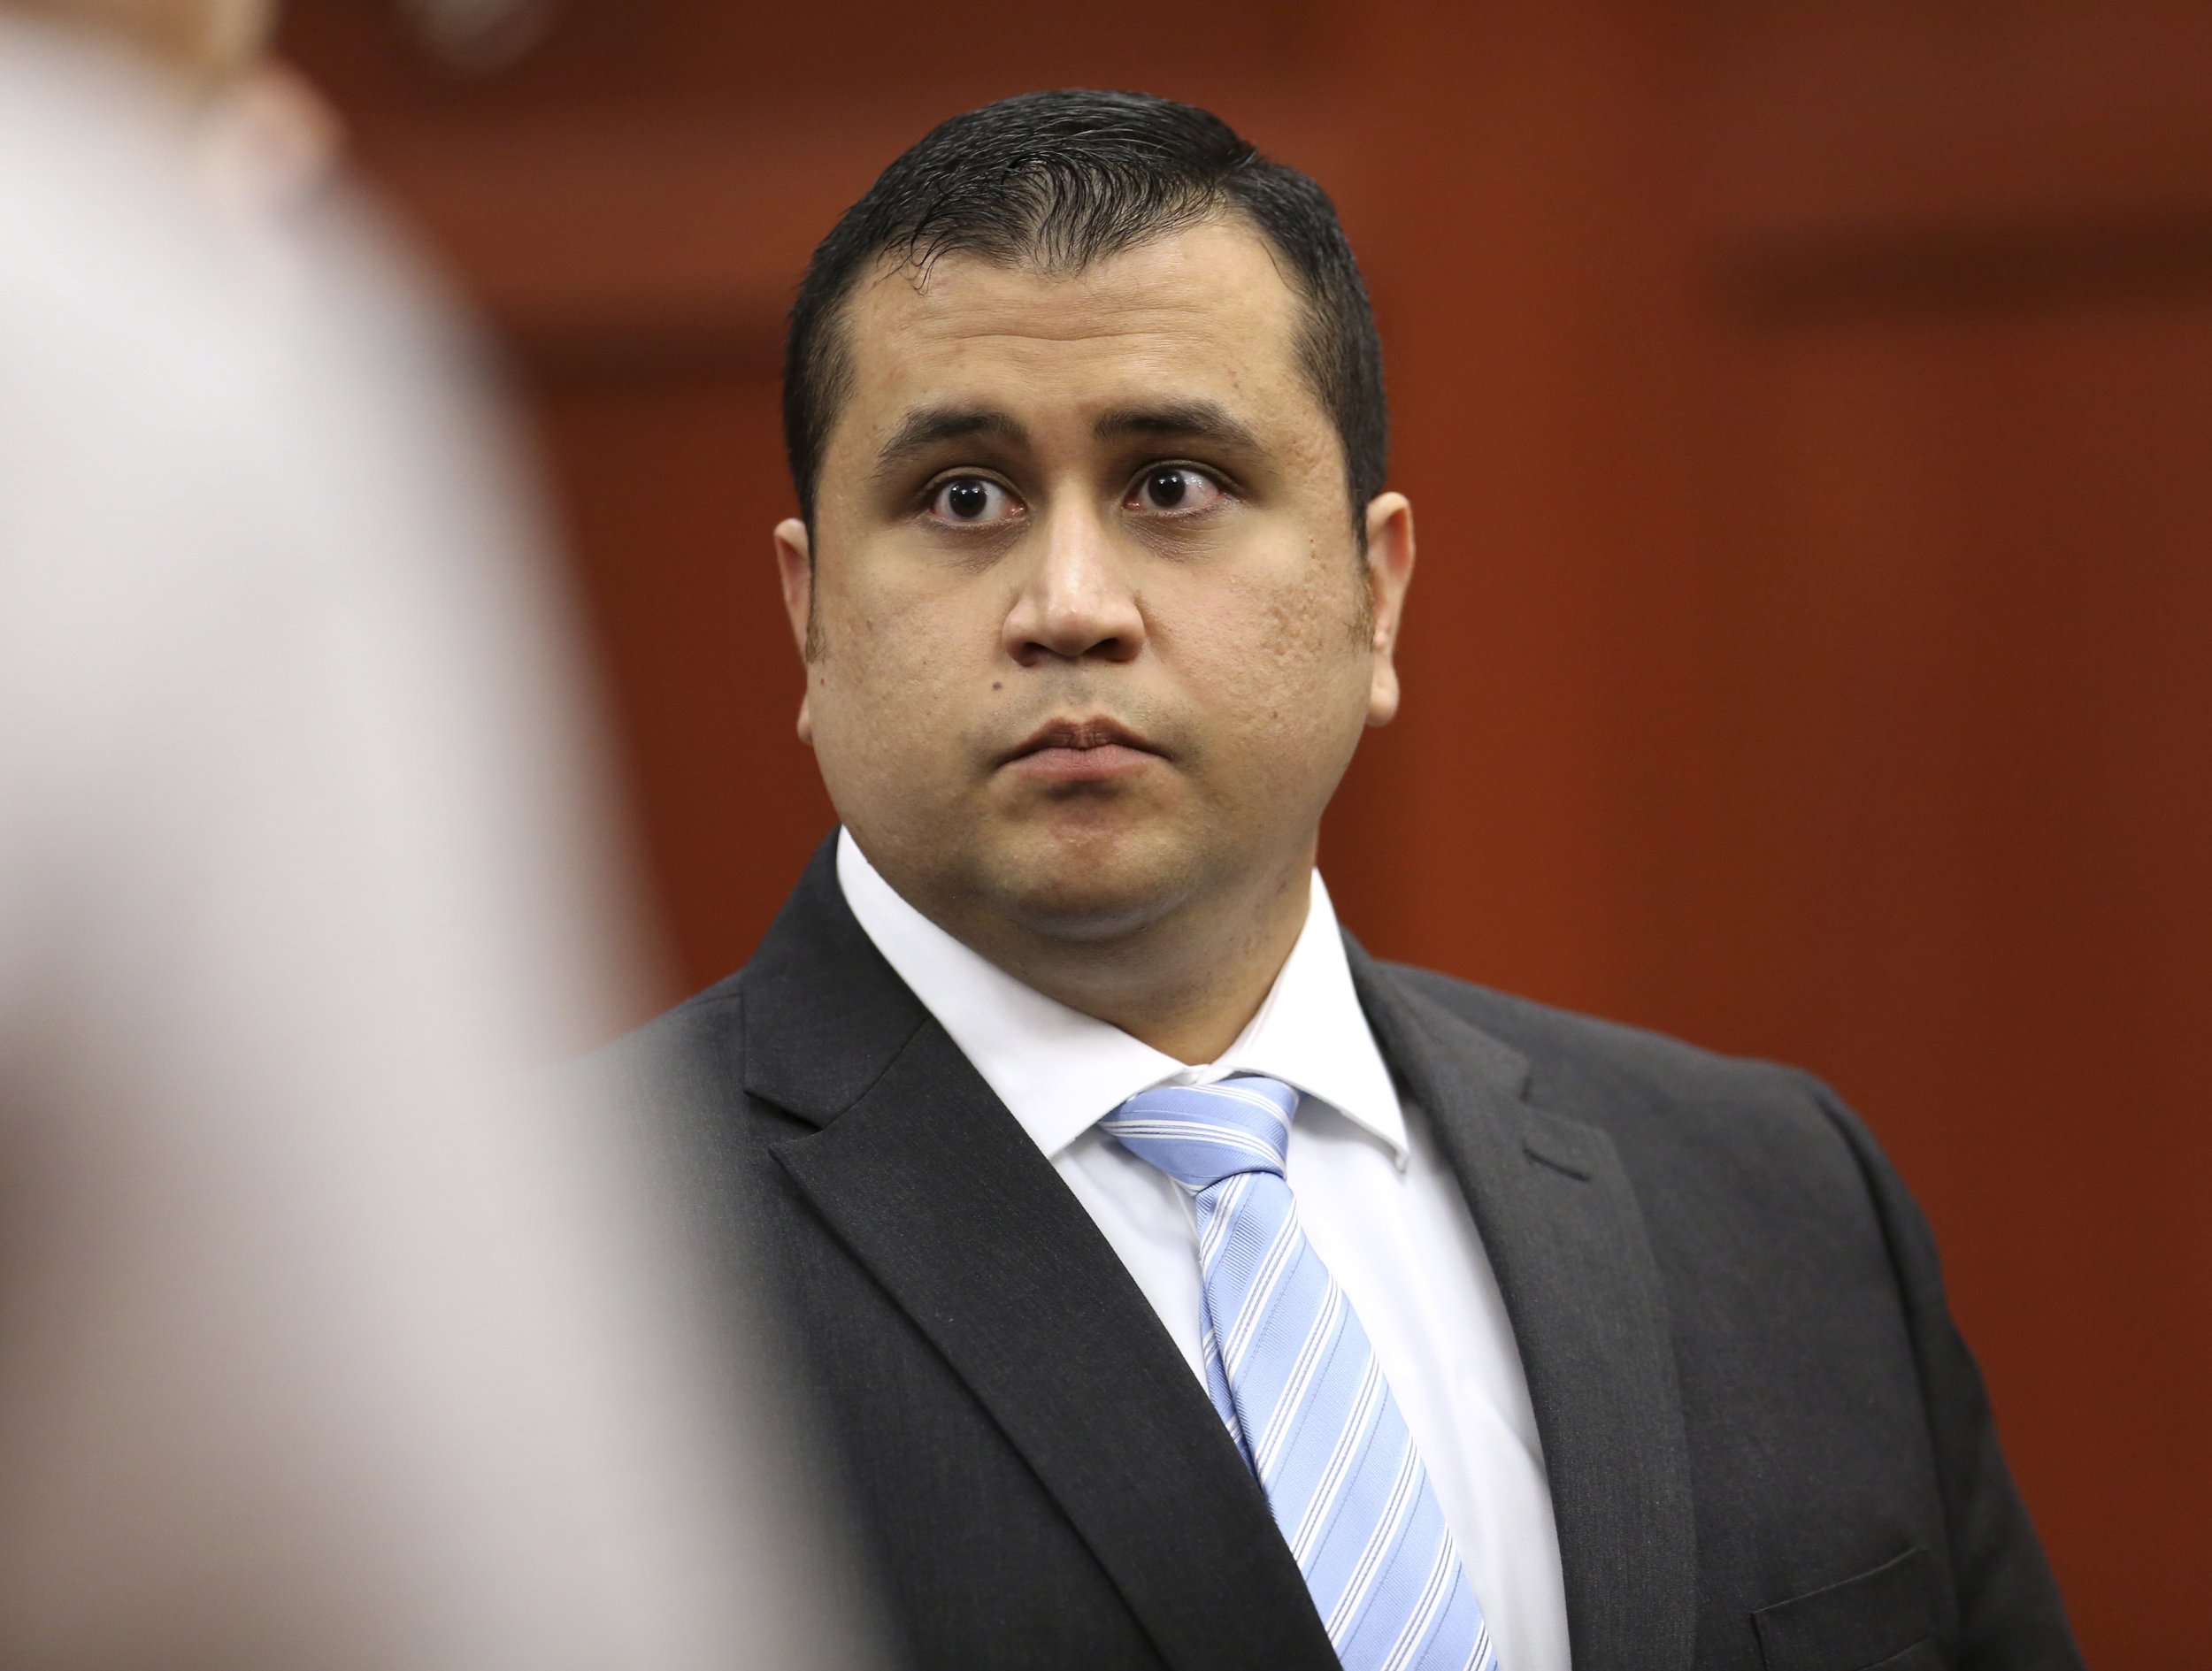 George Zimmerman Road Rage Acquitted Trayvon Martin Murderer Allegedly Threatened To Kill Driver